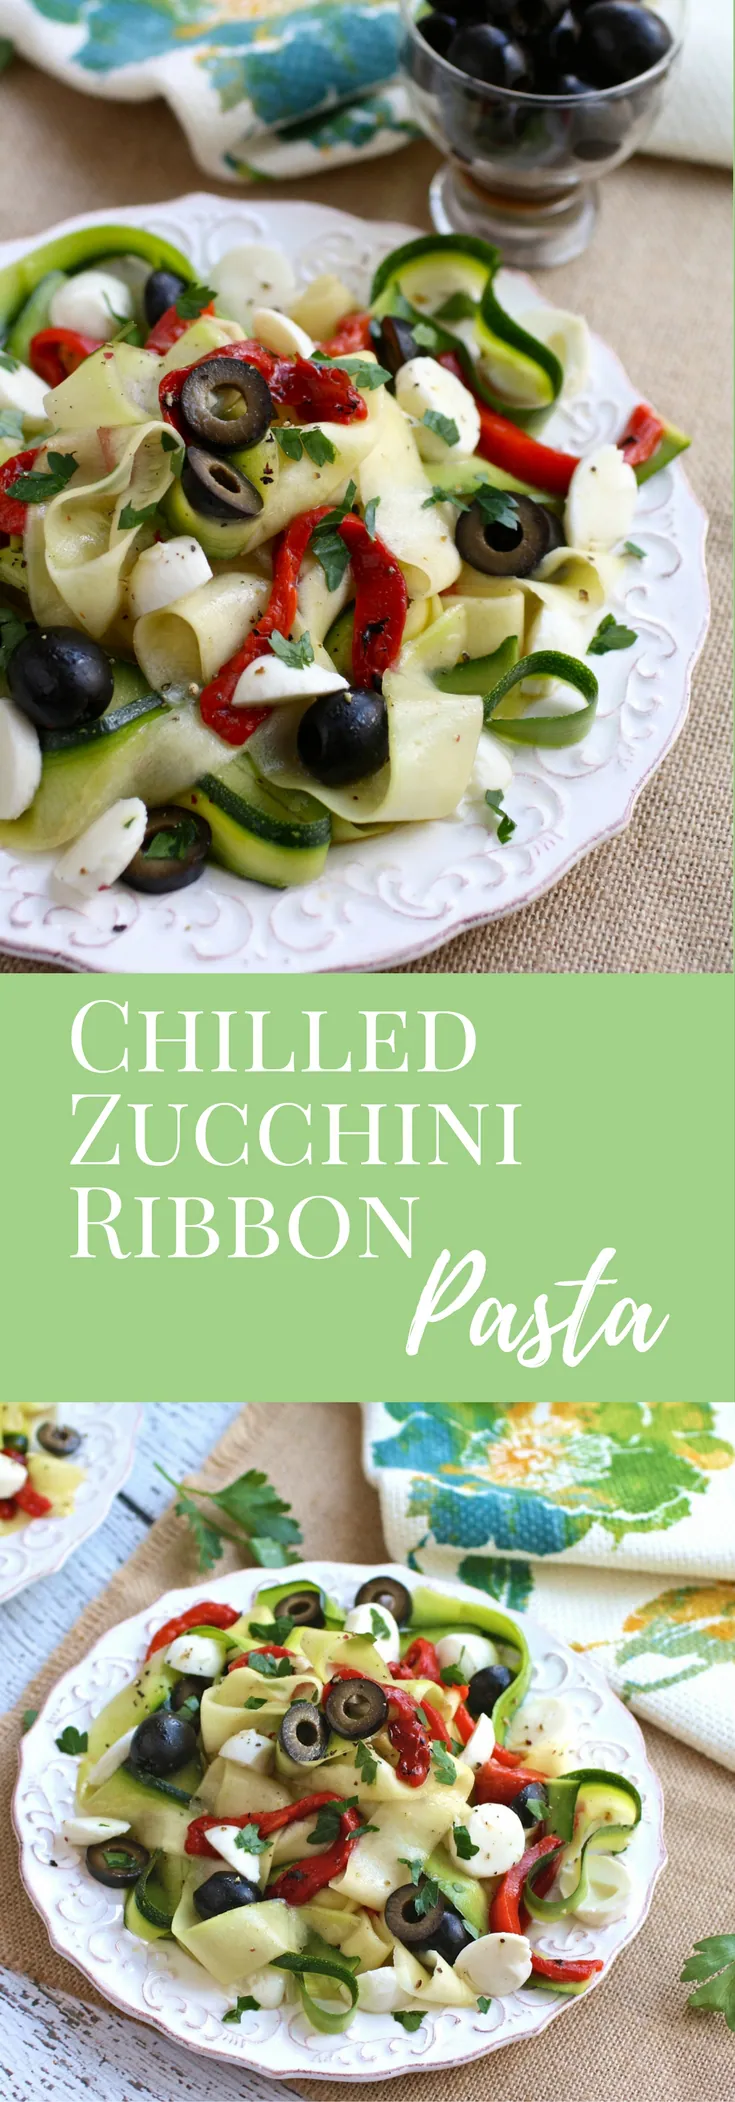 Chilled Zucchini Ribbon Pasta is a fabulous summer dish! You'll love a new way to use up the season's zucchini!